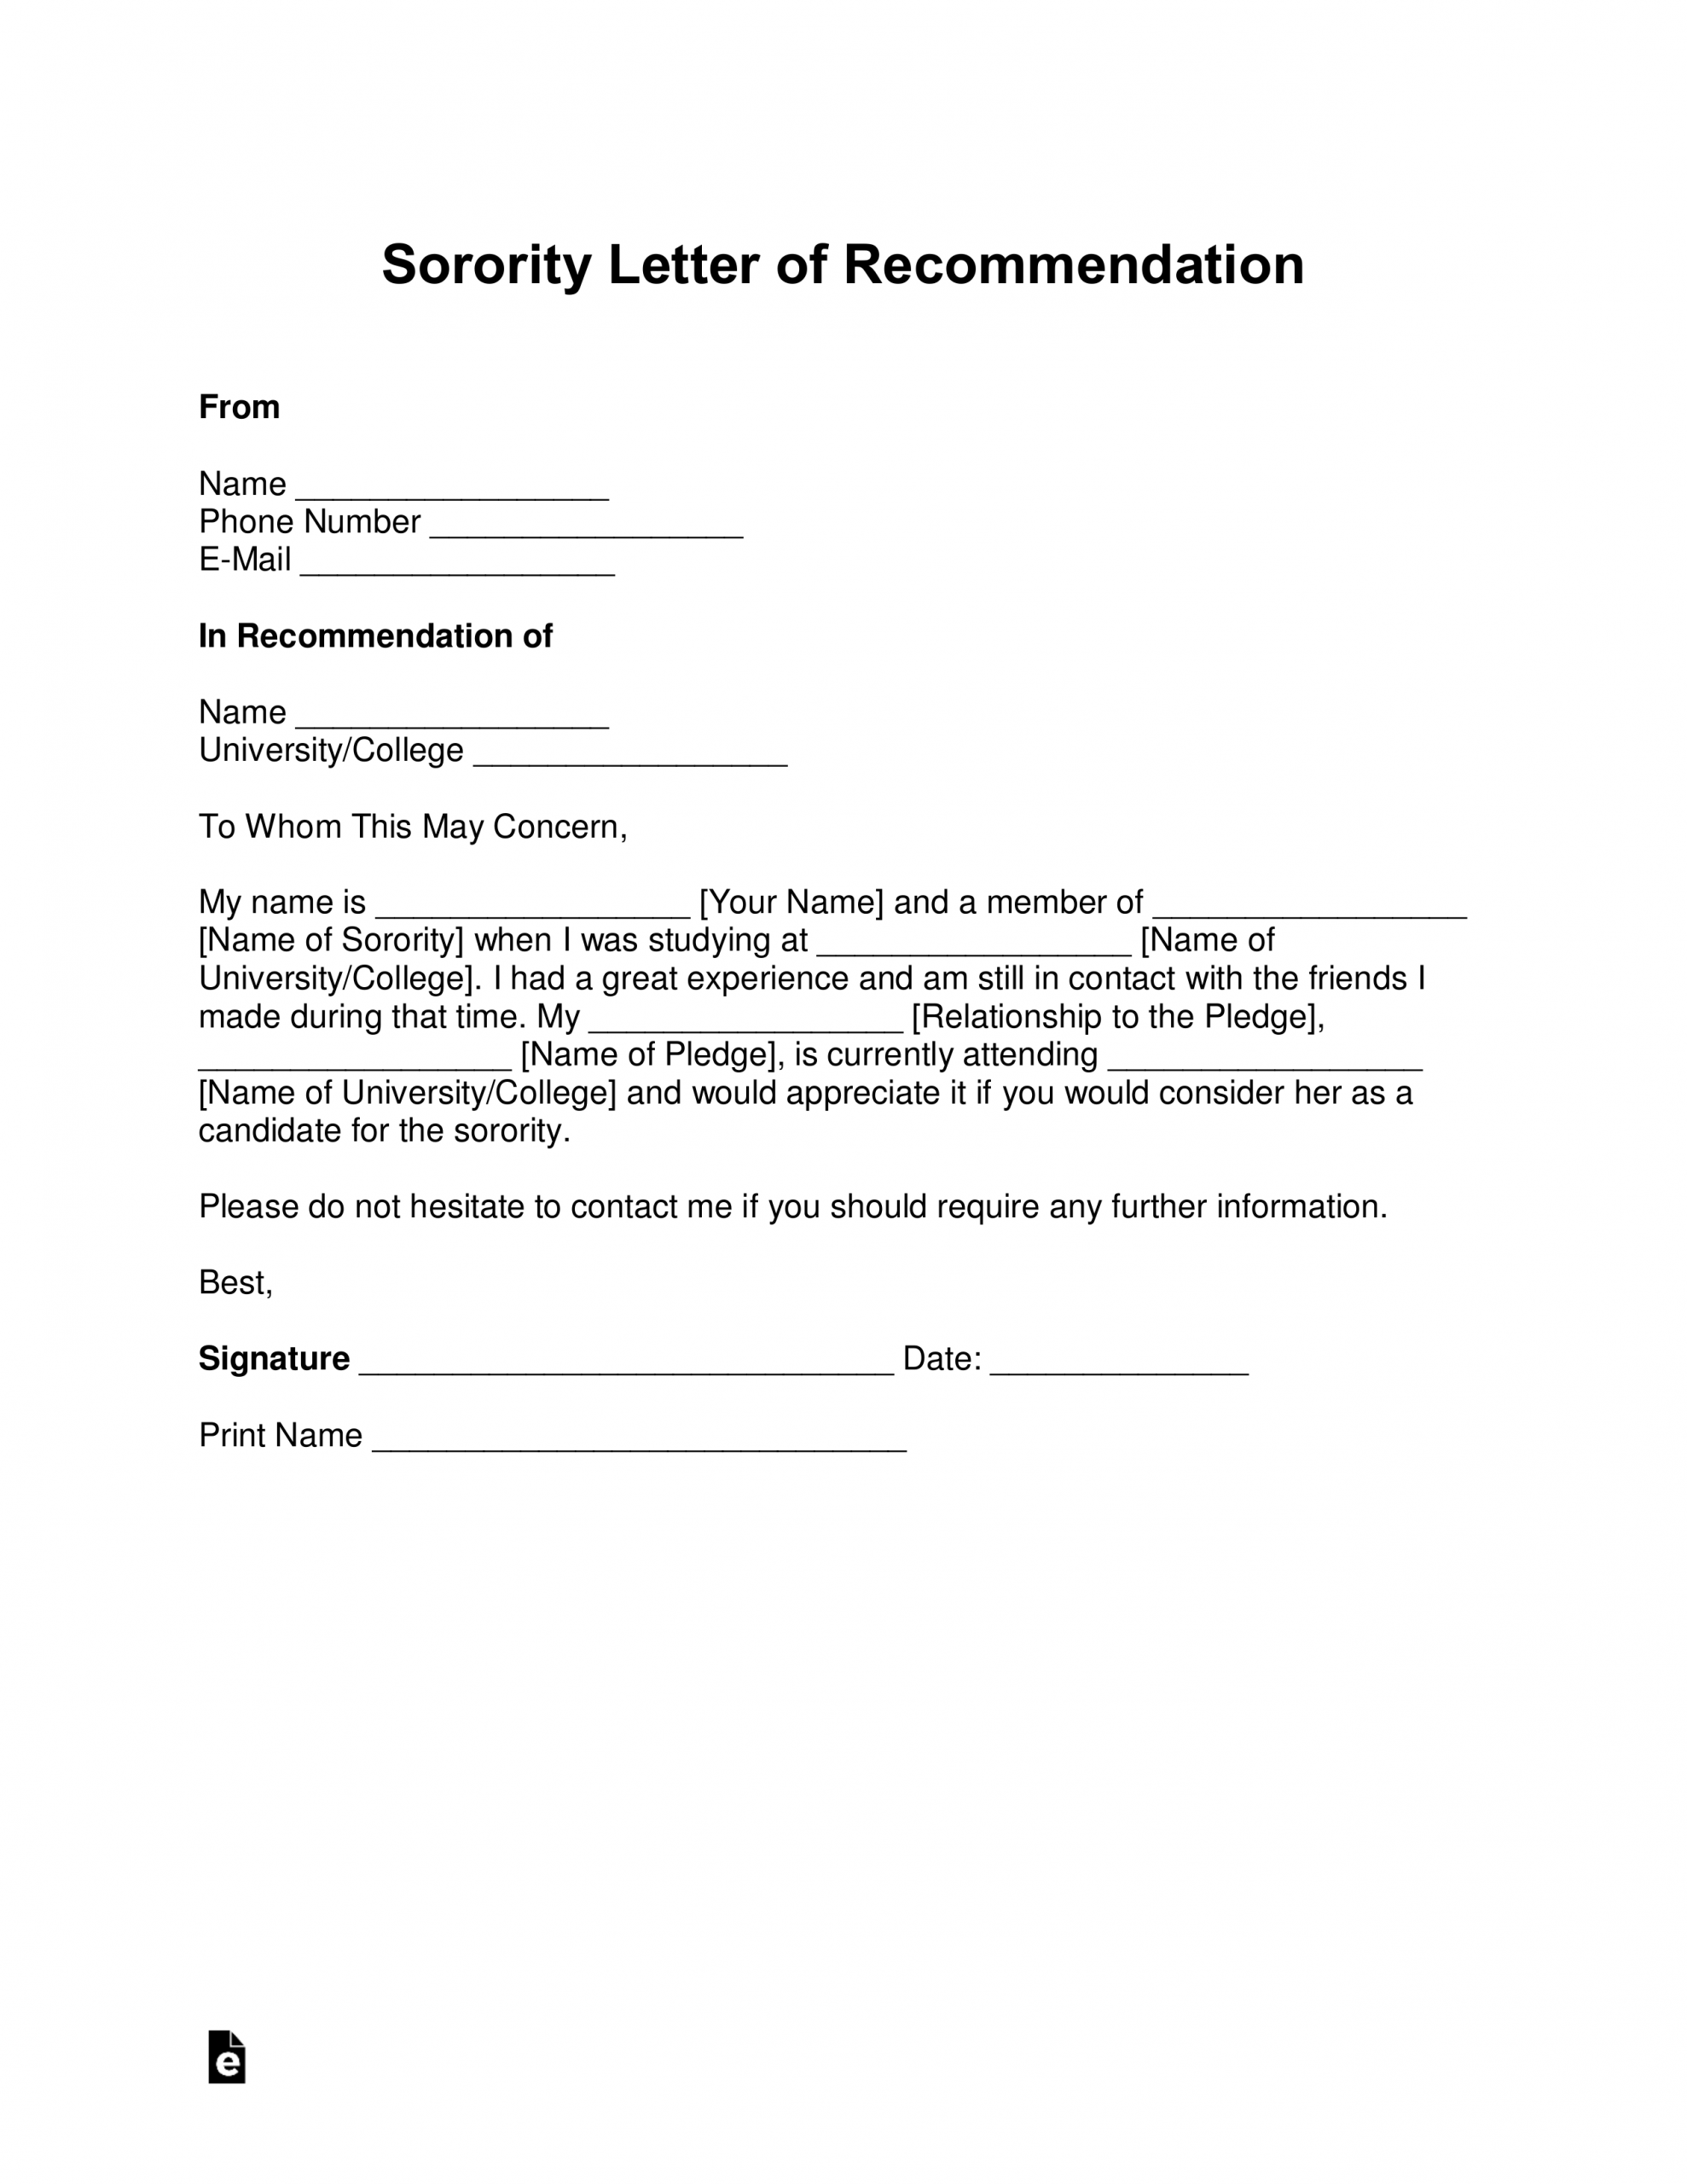 Free Sorority Recommendation Letter Template With Samples for size 2550 X 3301